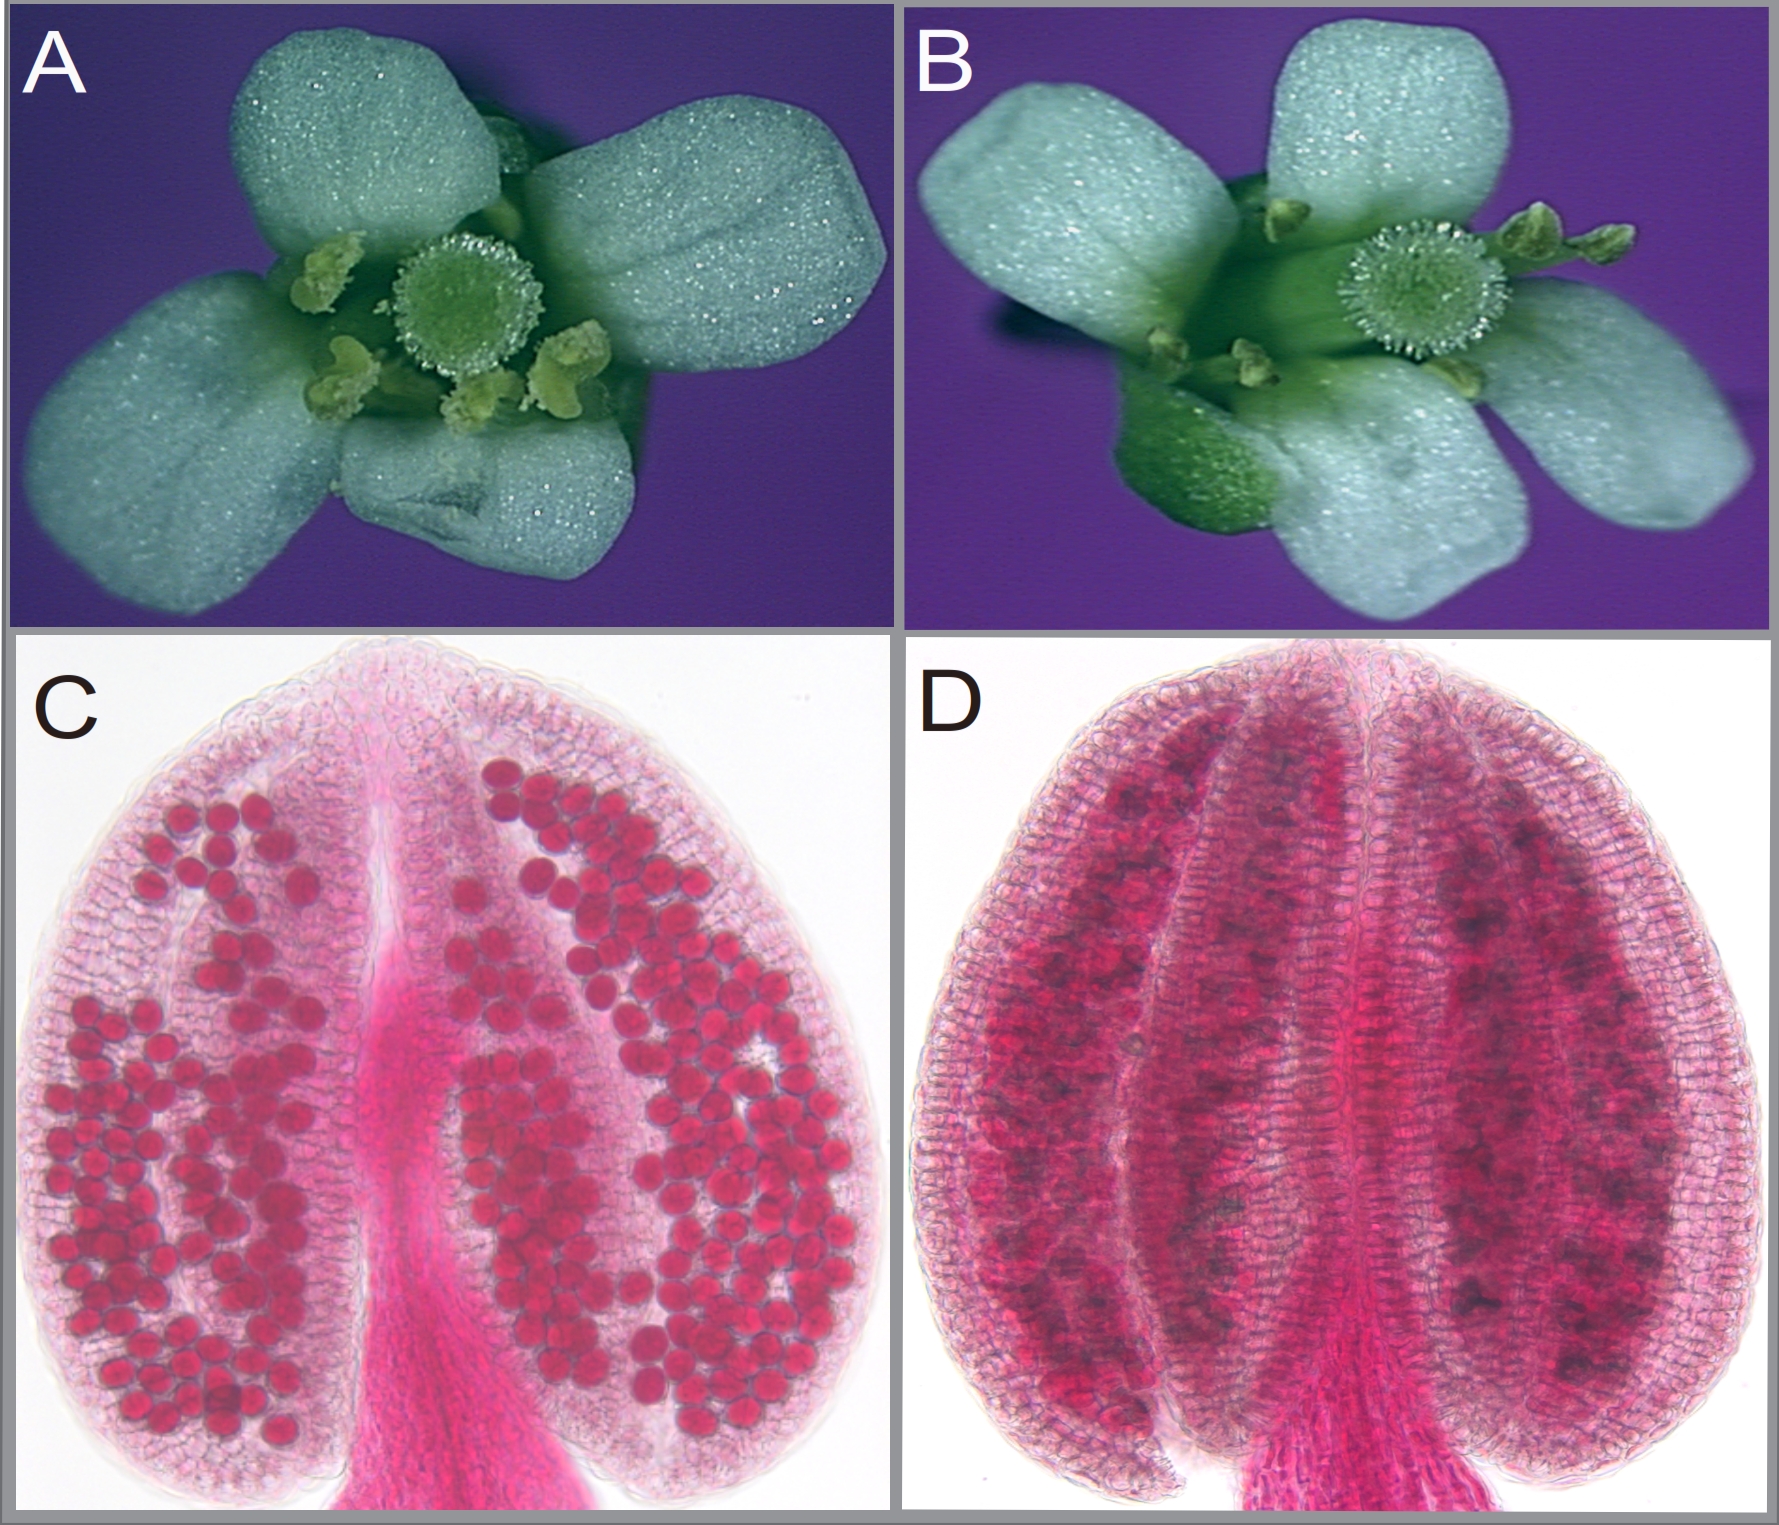 Phenotypes of Arabidopsis wild-type and the cdm1 mutant reproductive organs. (A), wild-type flower with plenty of pollen grains released from each anther. (B), cdm1 flower, showing similar floral structures but with no pollen grains observed on the anthers. (C), Alexander staining showing the viable pollen grains in a wild-type anther. (D), Dead pollen grains detected in blue in a cdm1 anther.